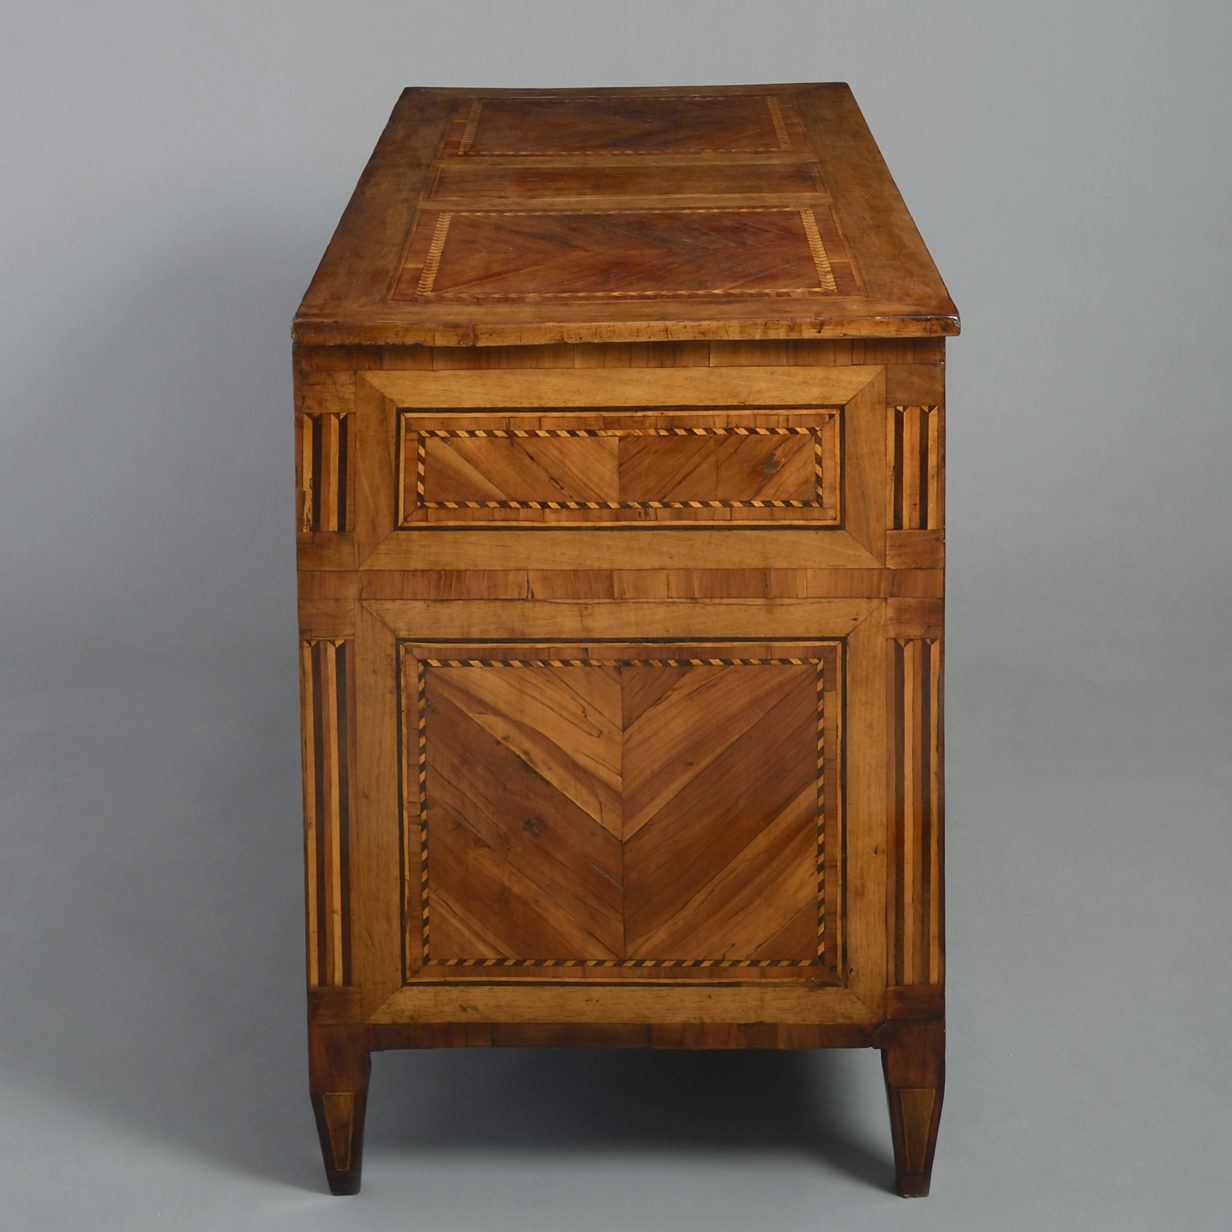 A late 18th century north italian parquetry commode